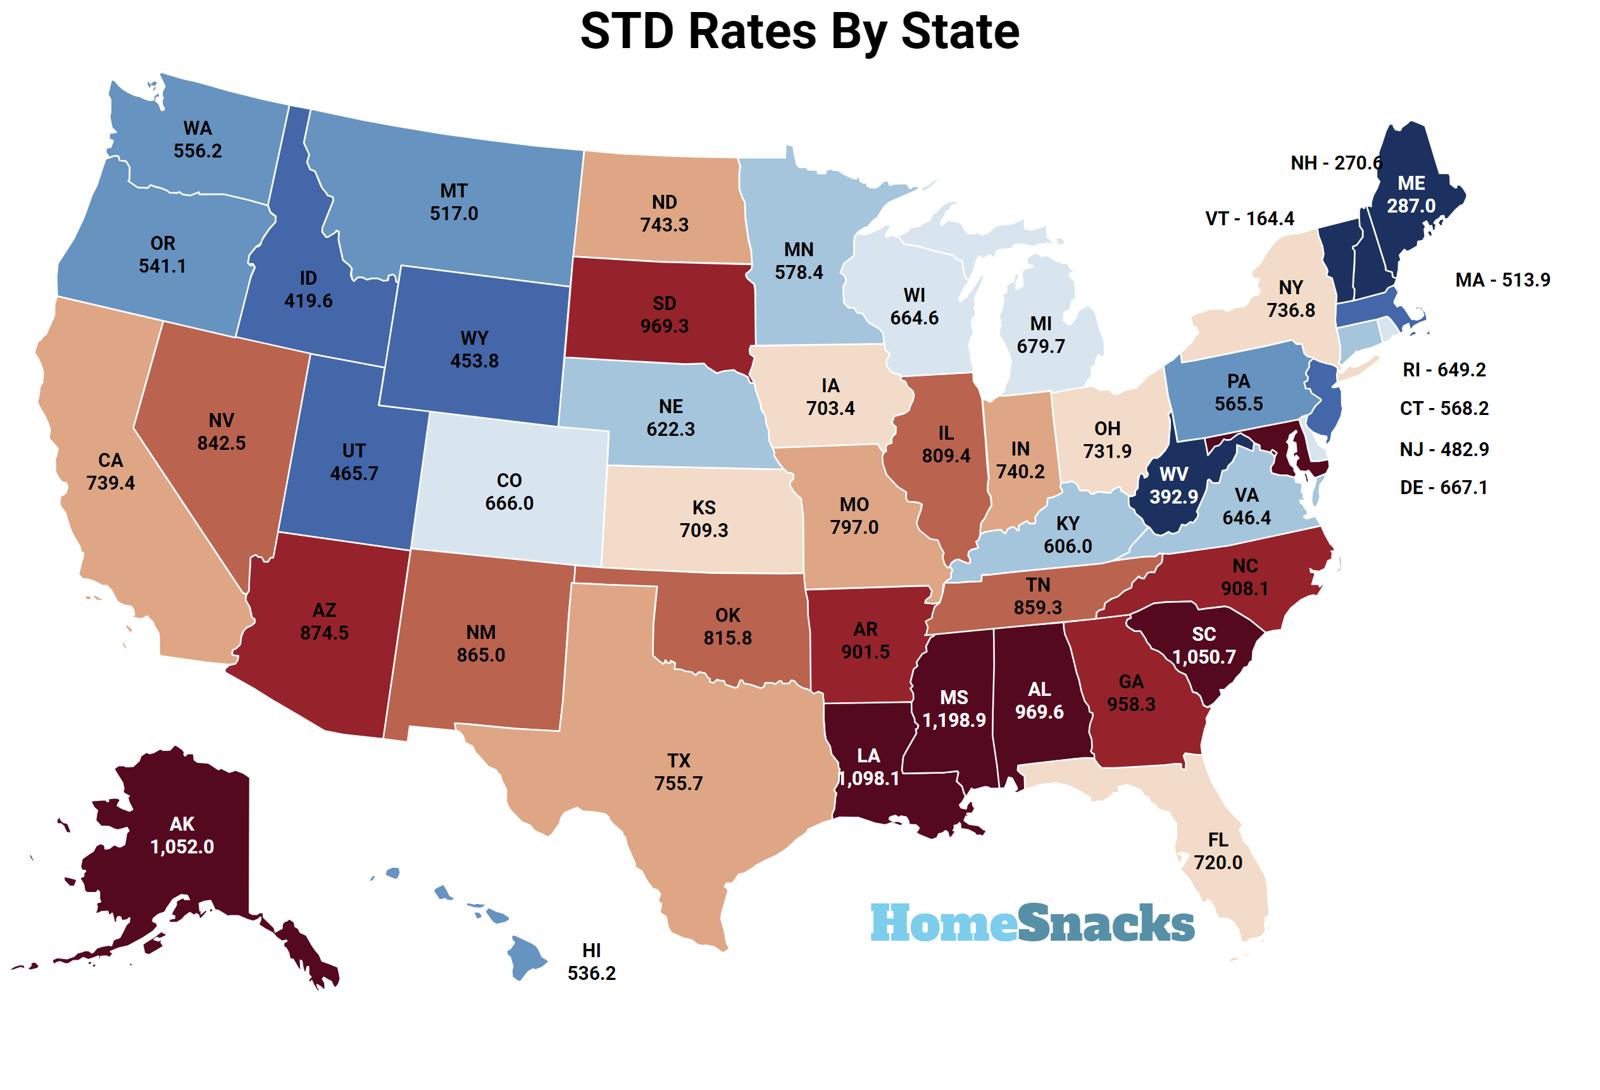 STD Rates By State